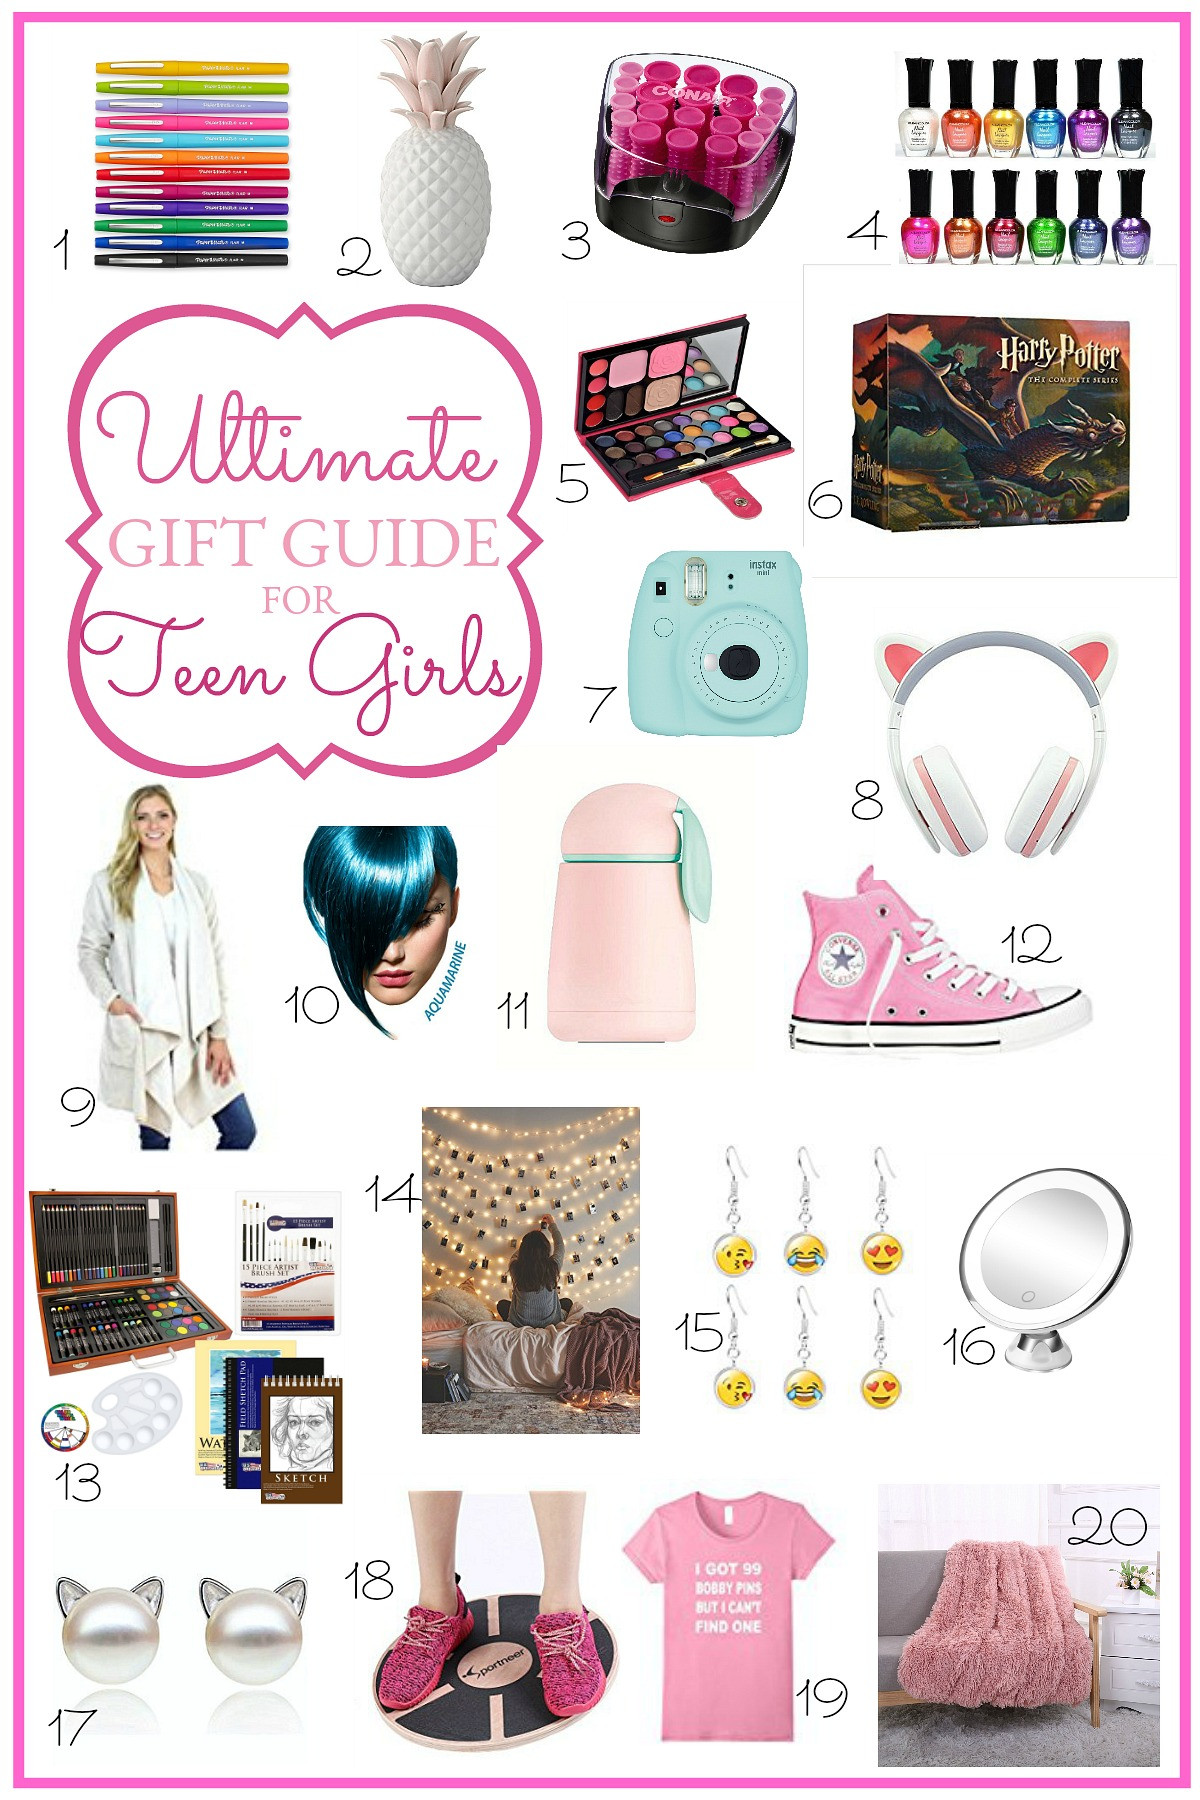 Top Gift Ideas For Girls
 Ultimate Holiday Gift Guide for Teen Girls